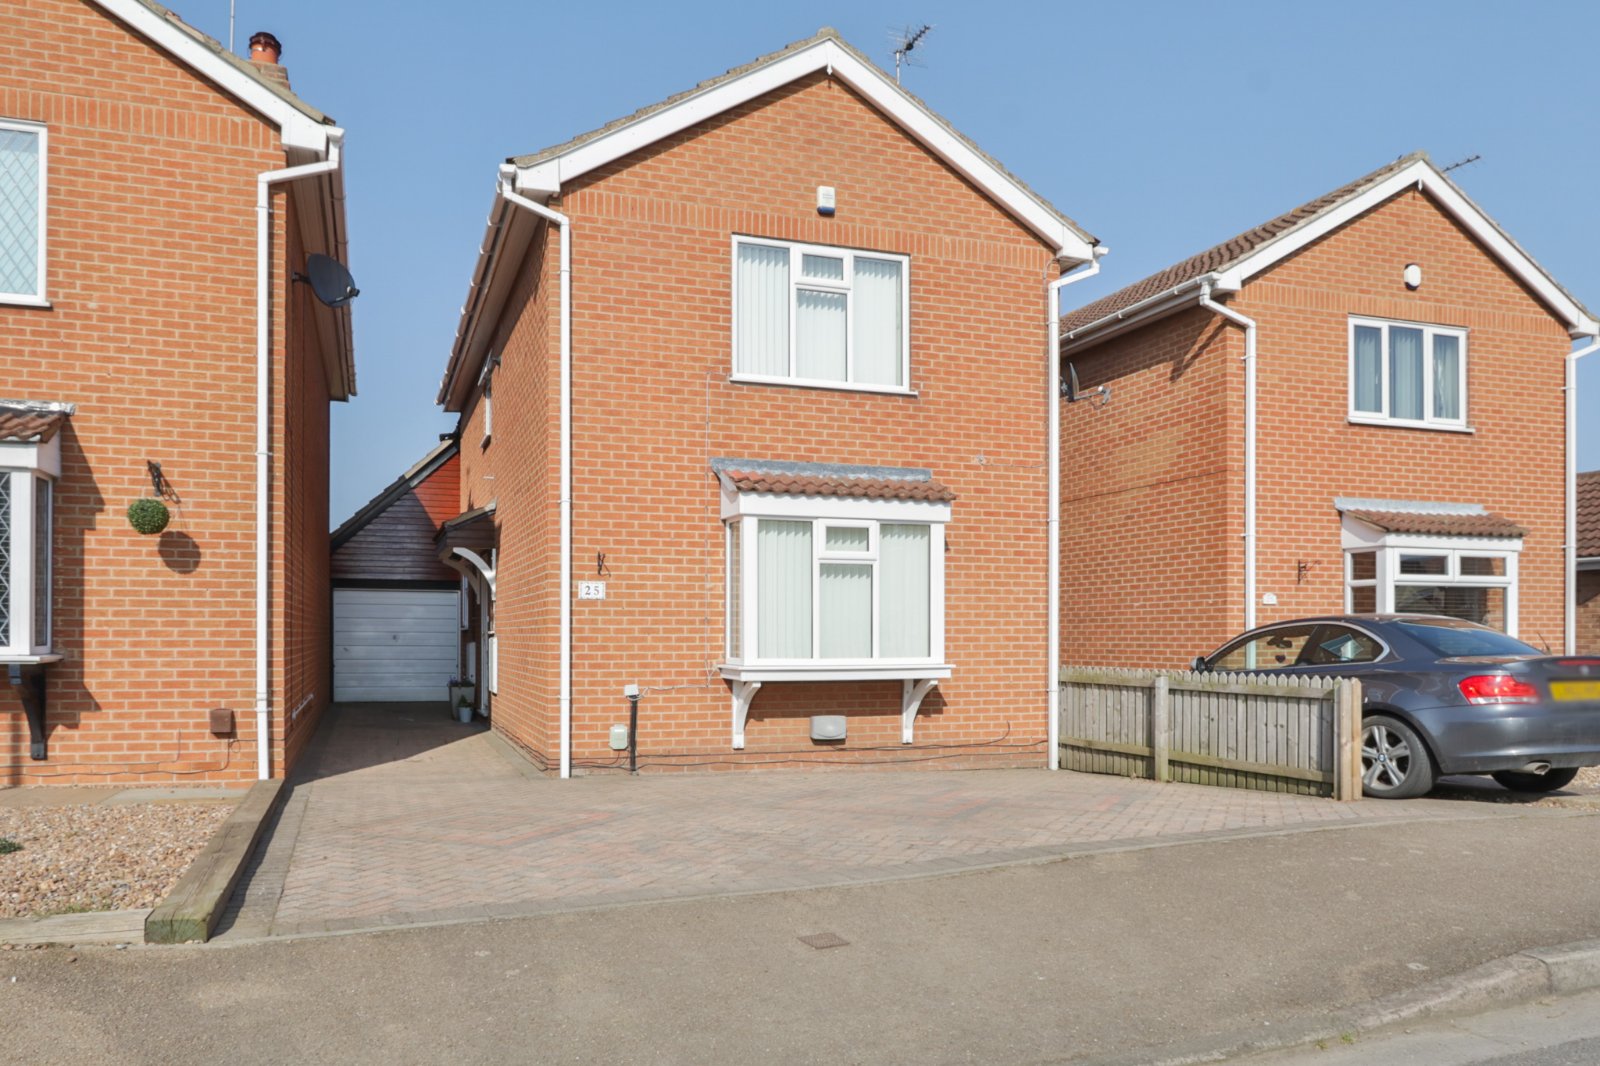 3 bed house for sale in Acklam Road, Hedon 0